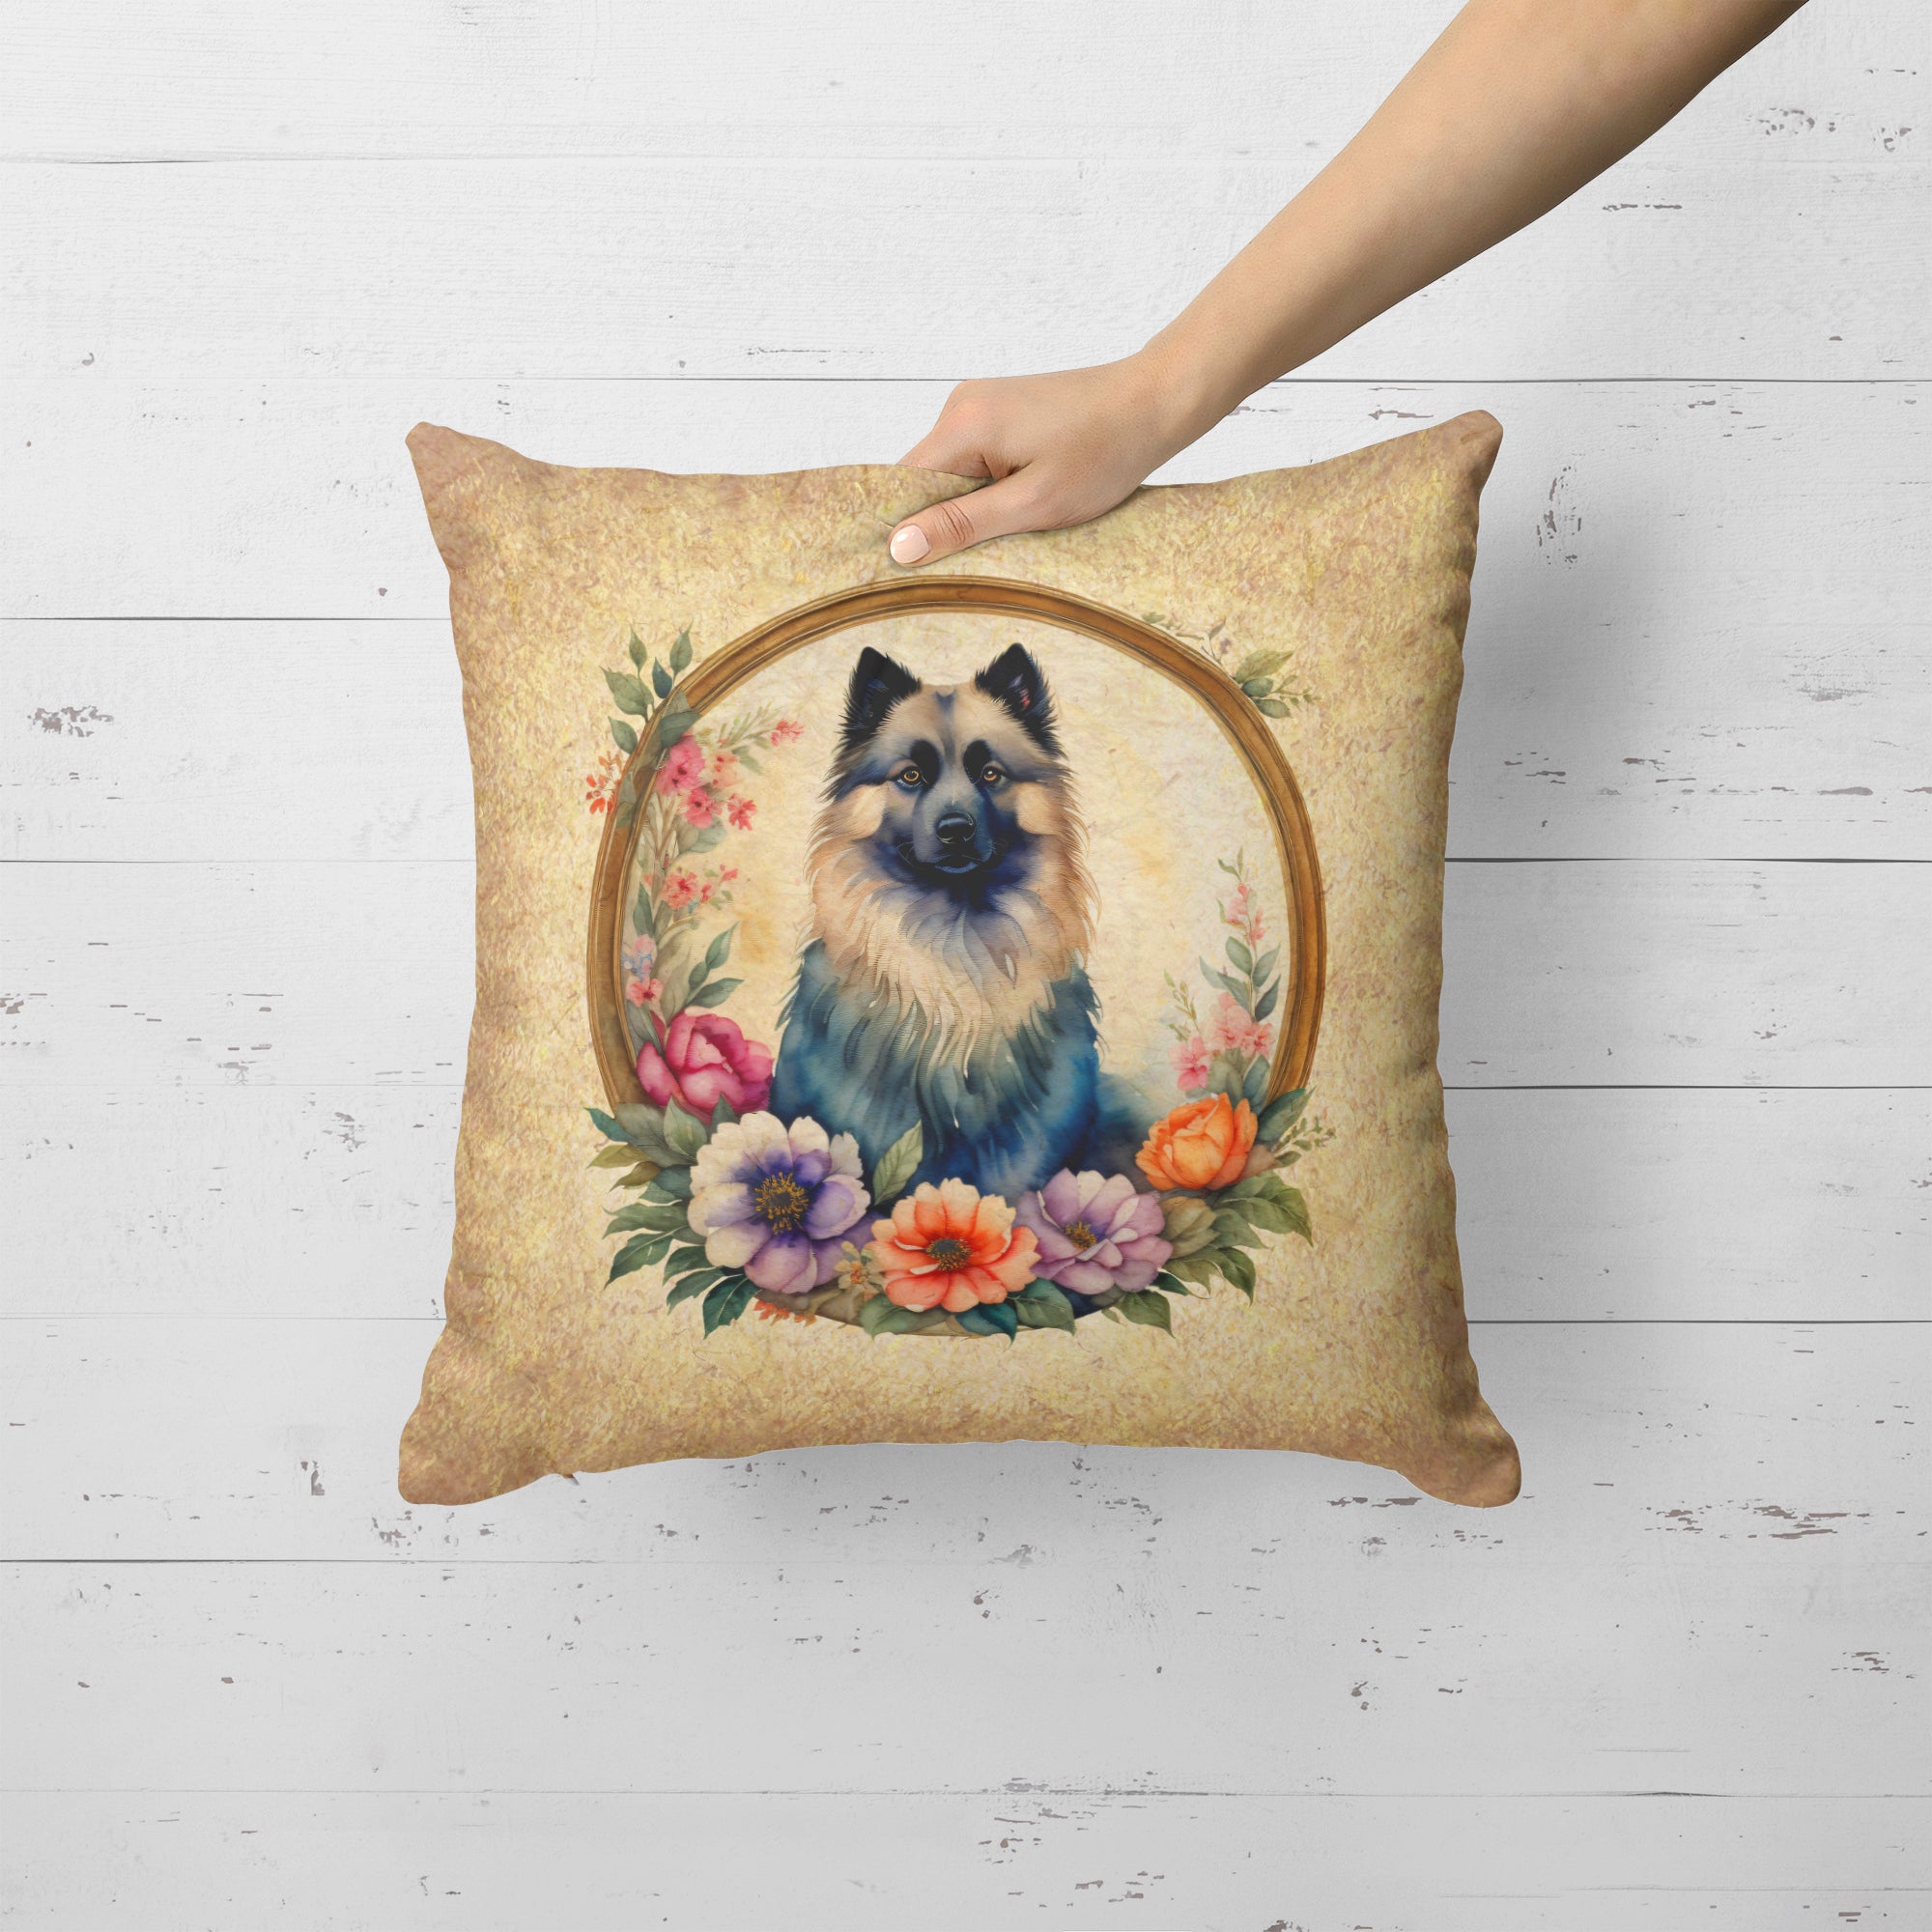 Buy this Keeshond and Flowers Fabric Decorative Pillow